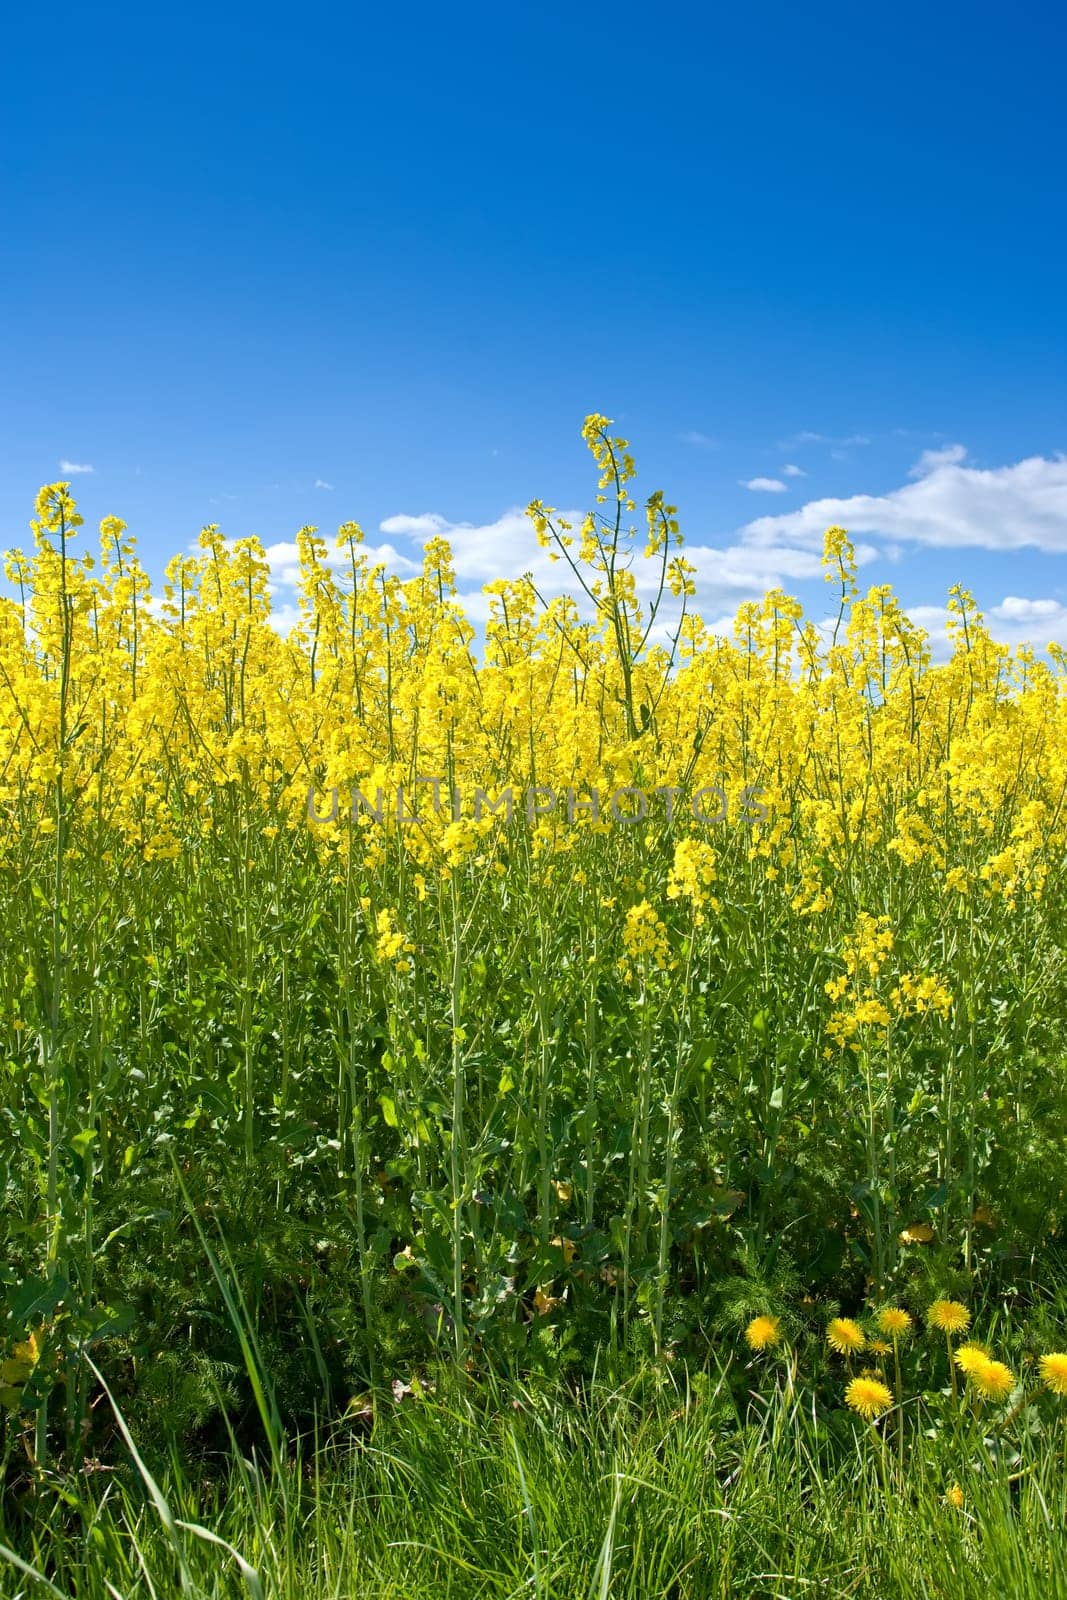 Sky, field or environment with grass for flowers, agro farming or sustainable growth in nature. Background, yellow canola plants or landscape of meadow, lawn or natural pasture for crops and ecology.